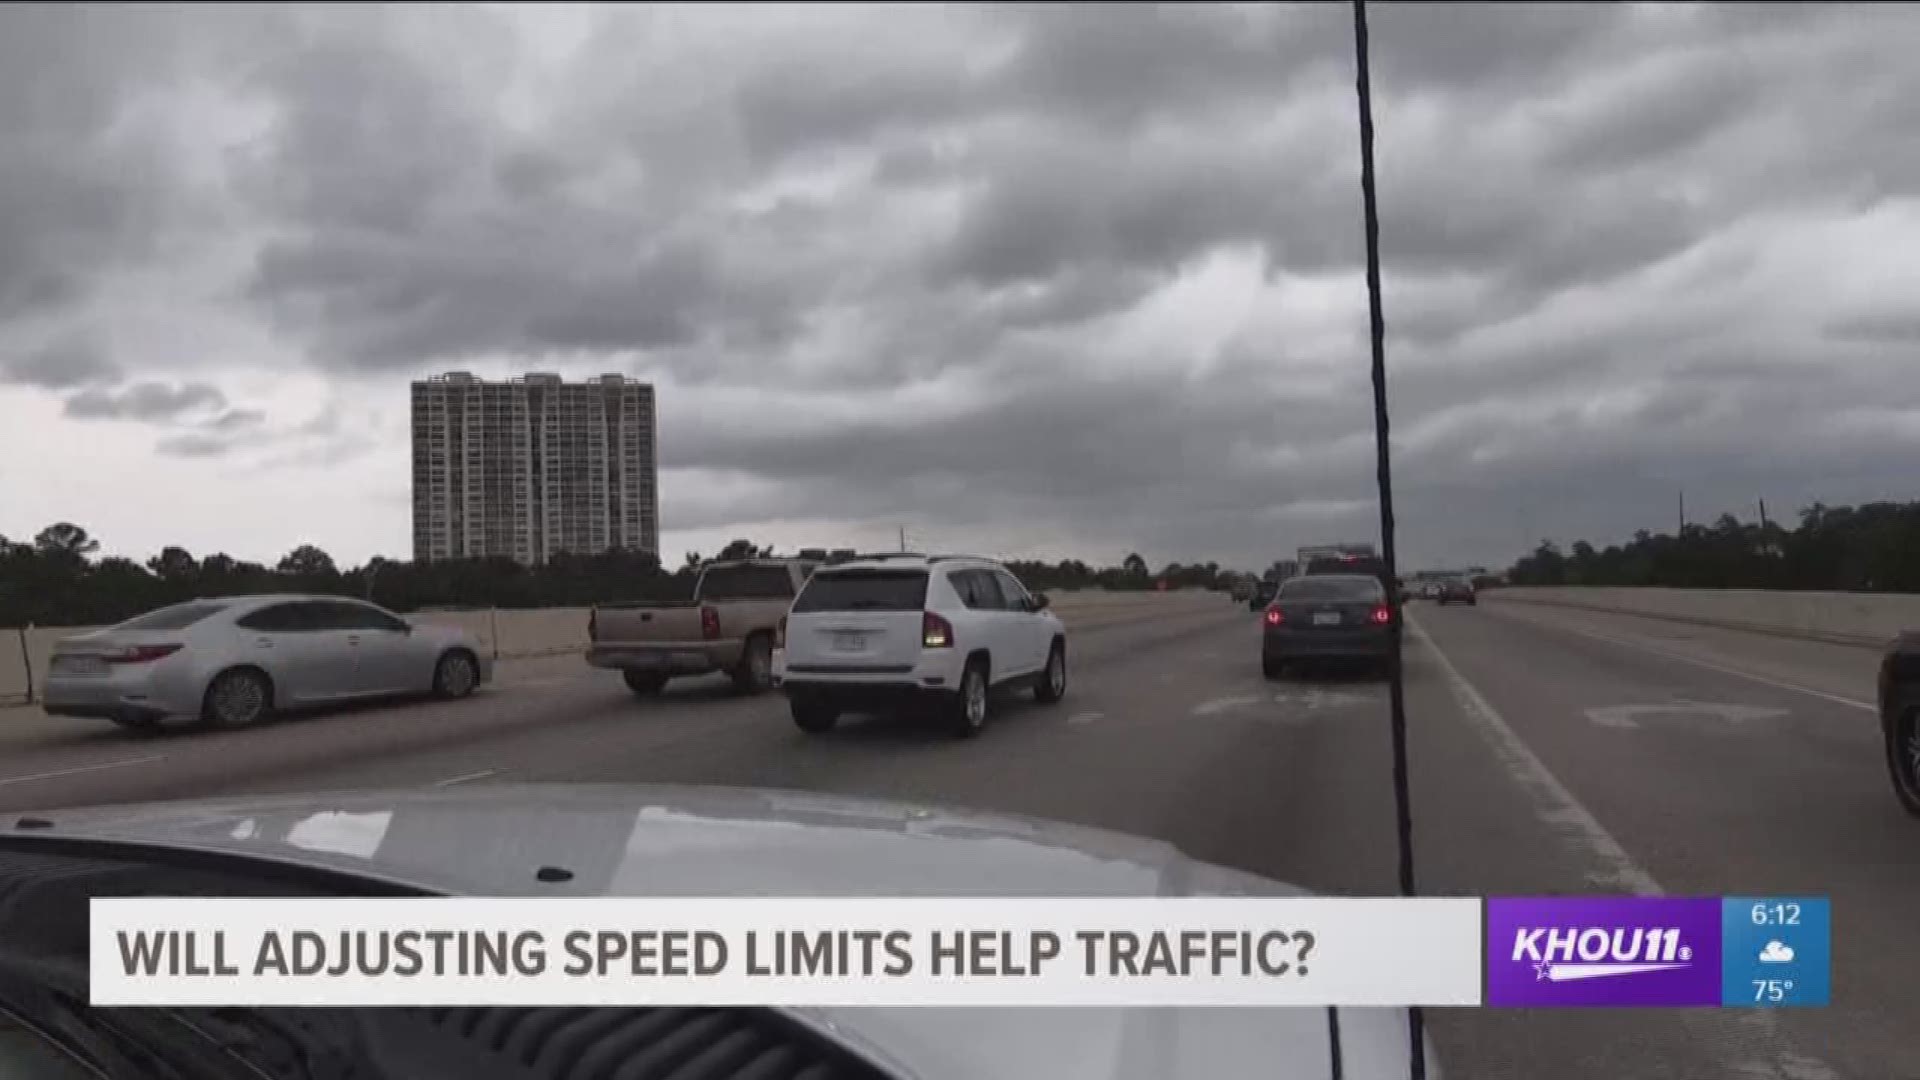 Transportation experts believe changing the speed limit to keep up with current conditions would ease the amount of time drivers spend on the road.